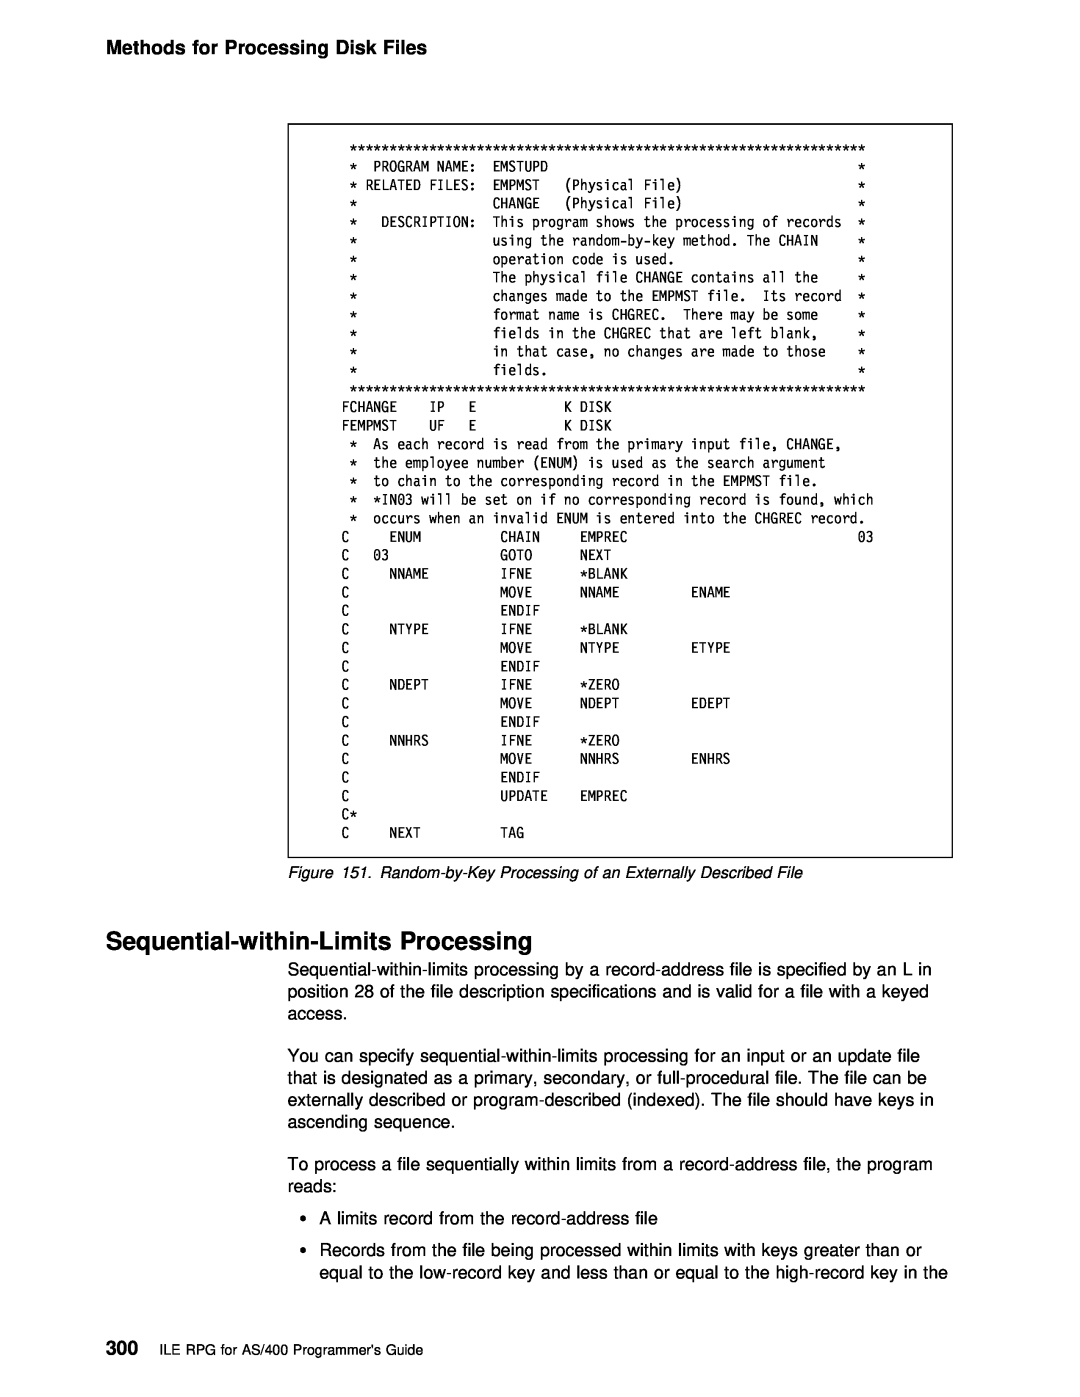 IBM AS/400 manual Sequential-within-Limits Processing, Methods for Processing Disk Files 